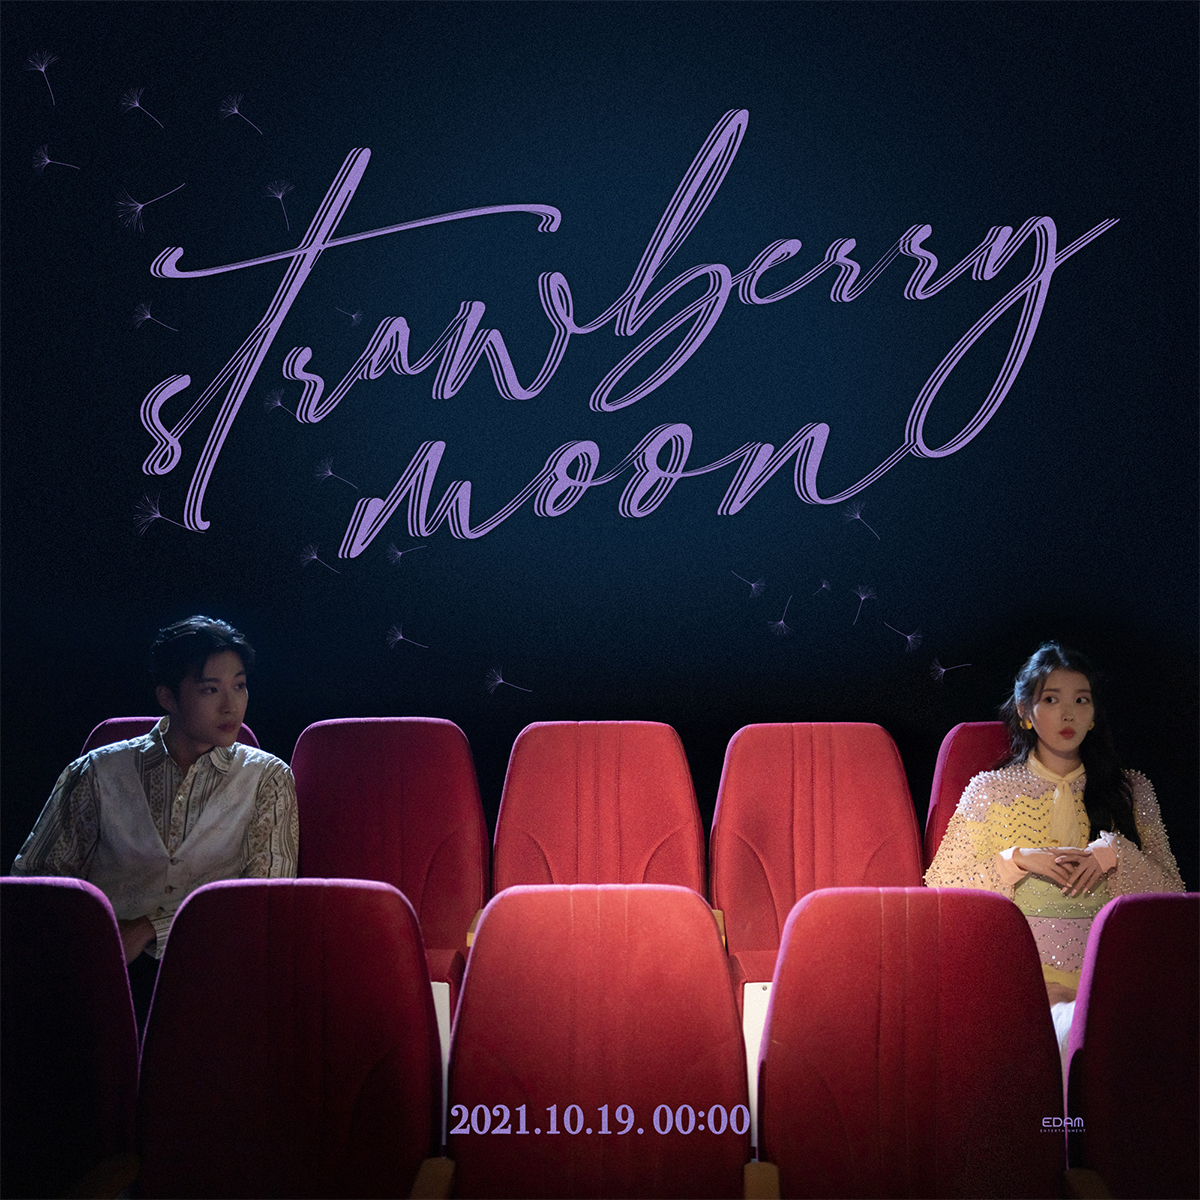 IU's new song 'strawberry moon' tops Melon's Top 100